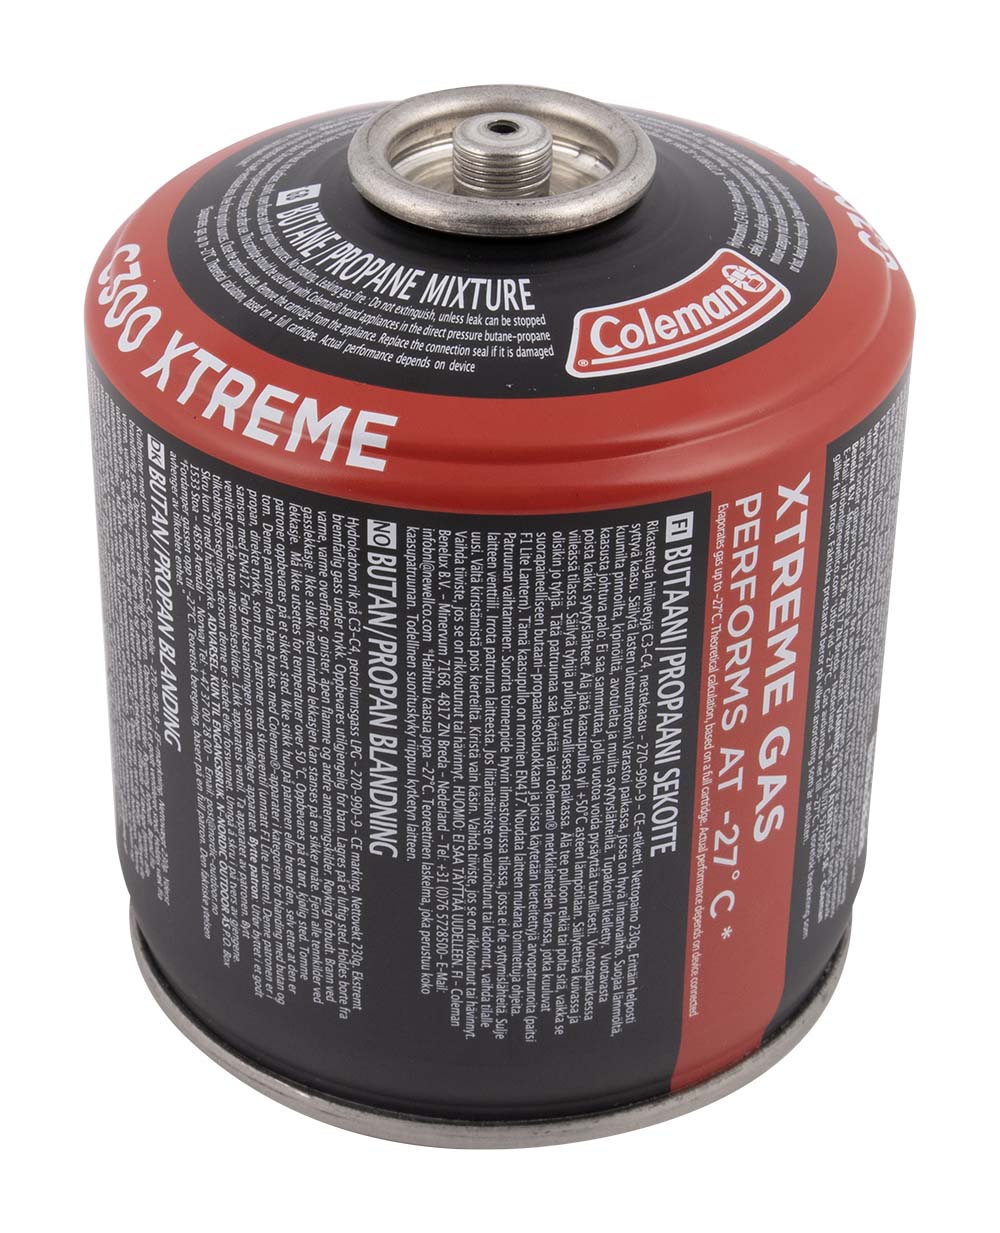 8904538 A 230-gram Coleman screw cartridge. The screw connector has a valve that makes it possible to disconnect the cartridge temporarily for later use.  The cartridge contains a mix of butane and propane gas so that it also functions at lower temperatures to 27 degrees and at higher altitudes.